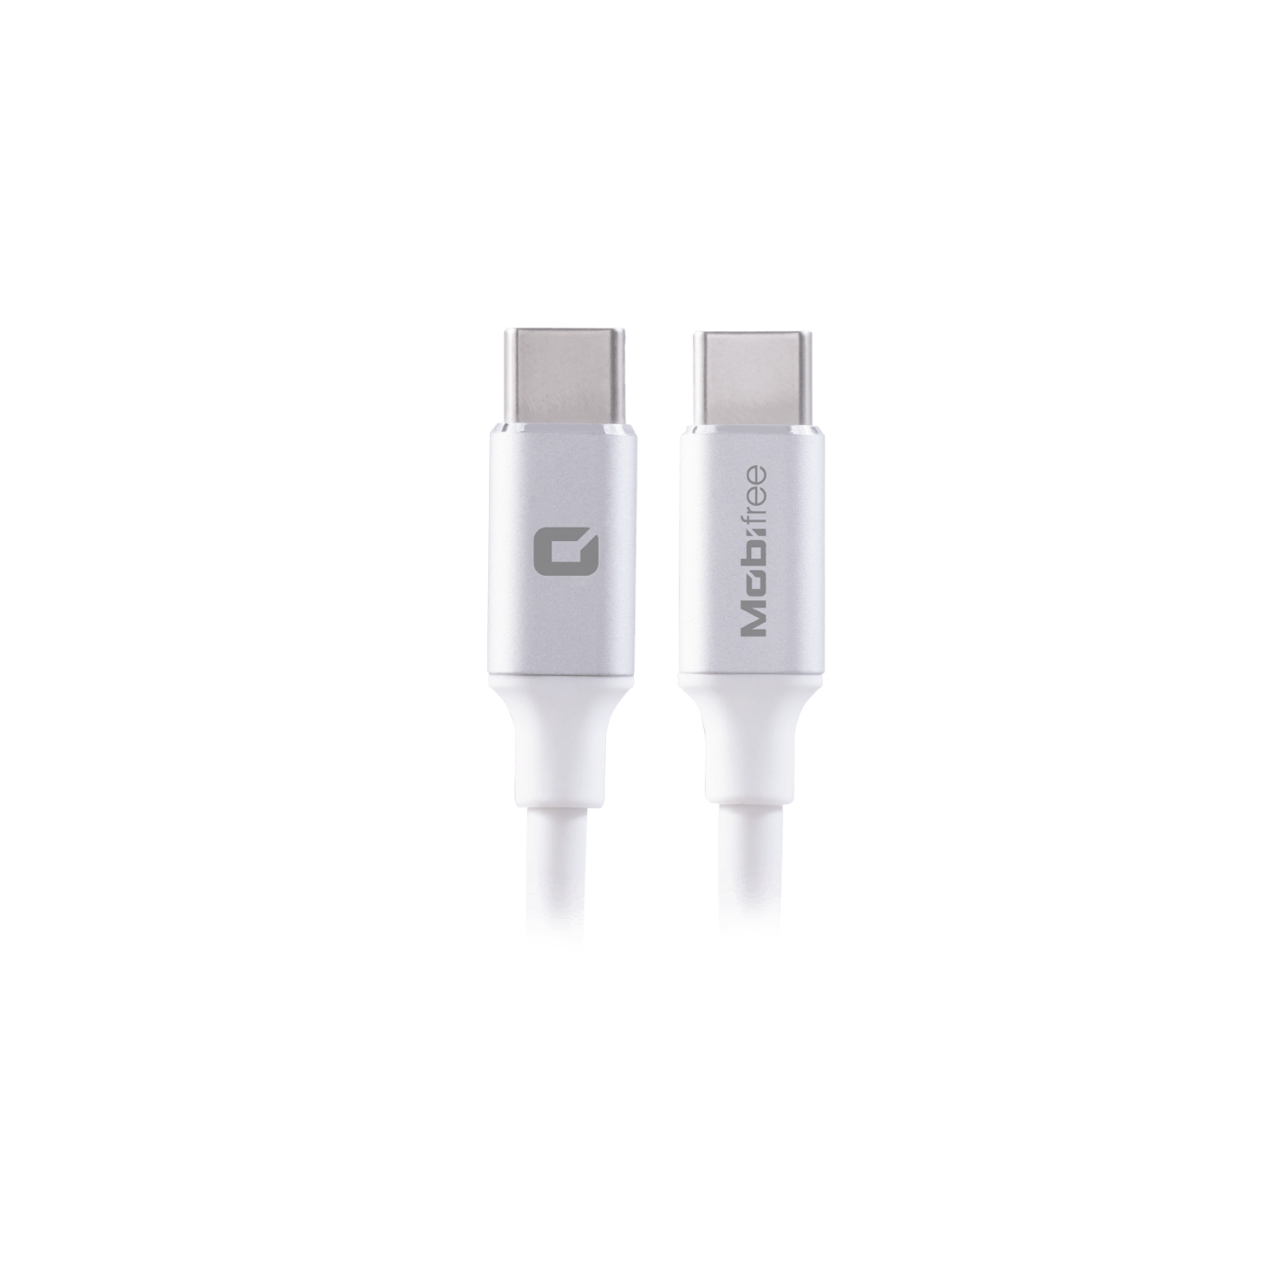 Cable C A C Mobifree Cable Tipo C A C Usb C Usb C 1 M Blanco Mb-923705